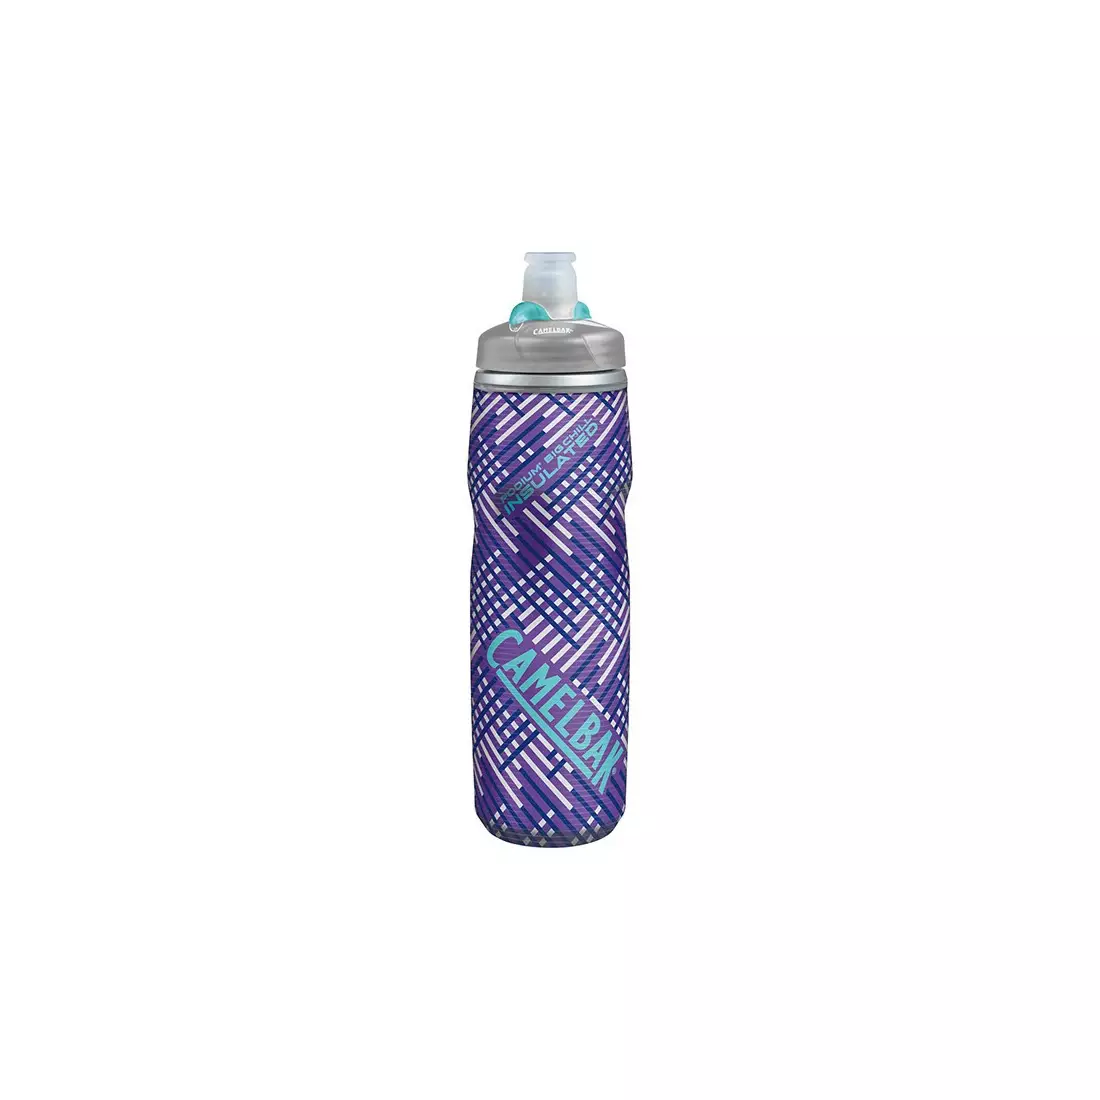 Camelbak SS17 Podium Big Chill thermal bicycle bottle 25oz/ 750 ml Periwinkle